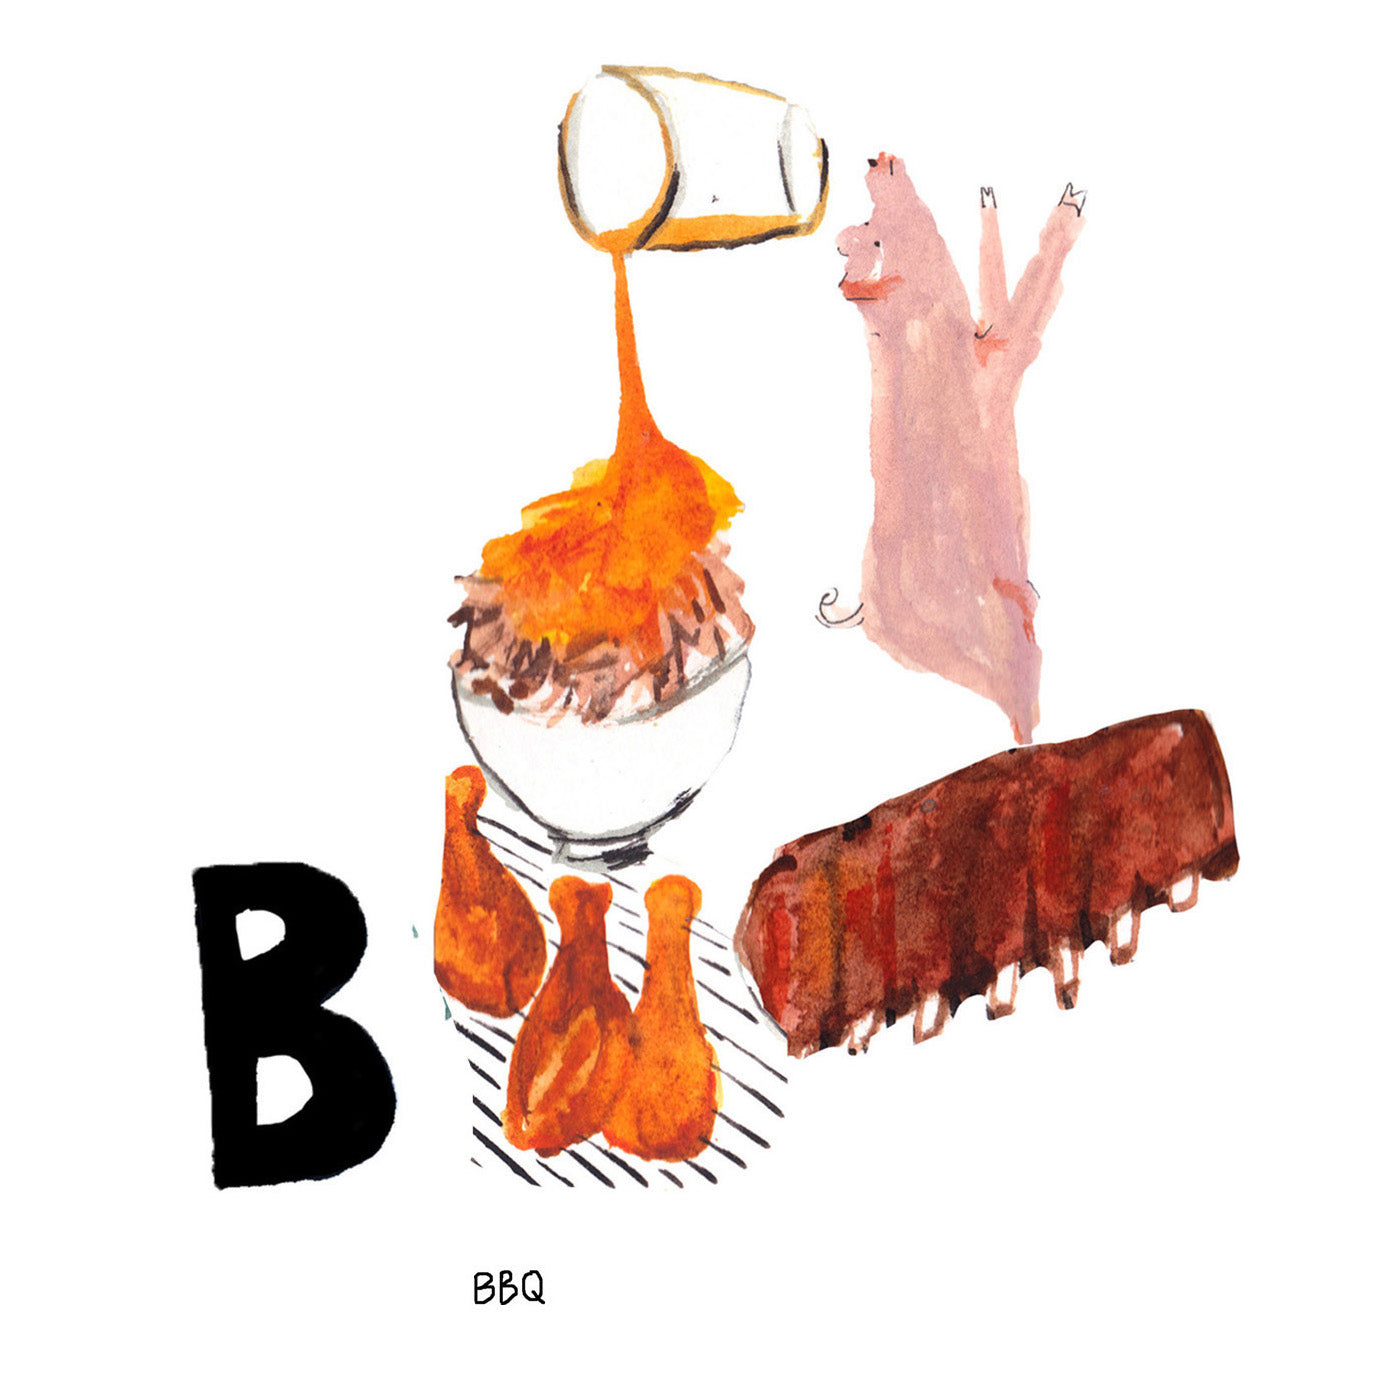 B is for BBQ. It is an age-old debate but ask any South Carolinian, and they’ll tell you with conviction that this is the birthplace of BBQ, regardless of sauce preference.